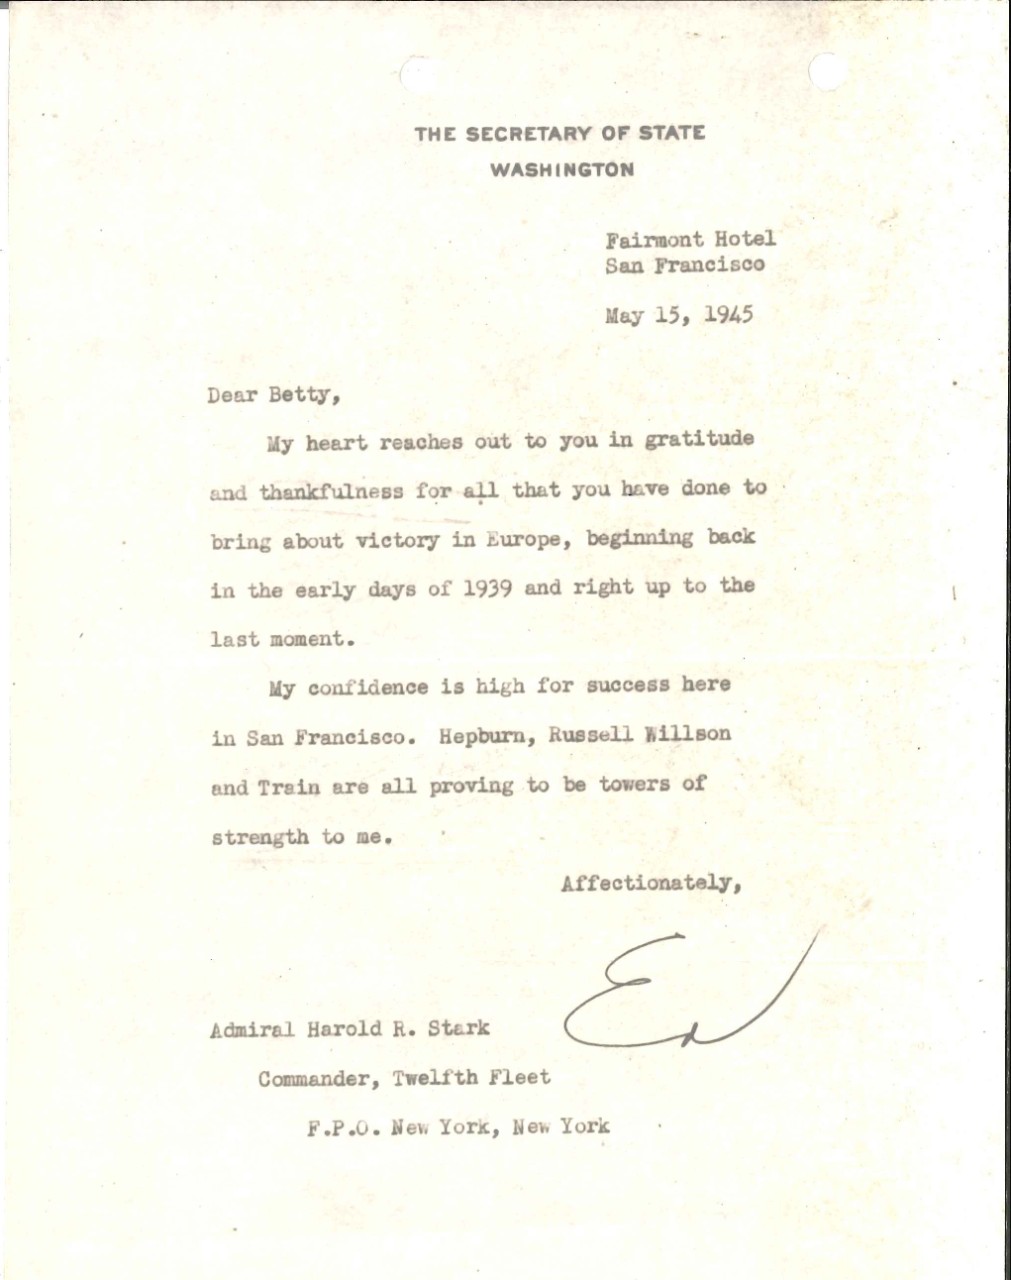 <p>Letter from Secretary of State Edward Stettinius to Admiral Harold &quot;Betty&quot; Stark, May 15, 1945</p>